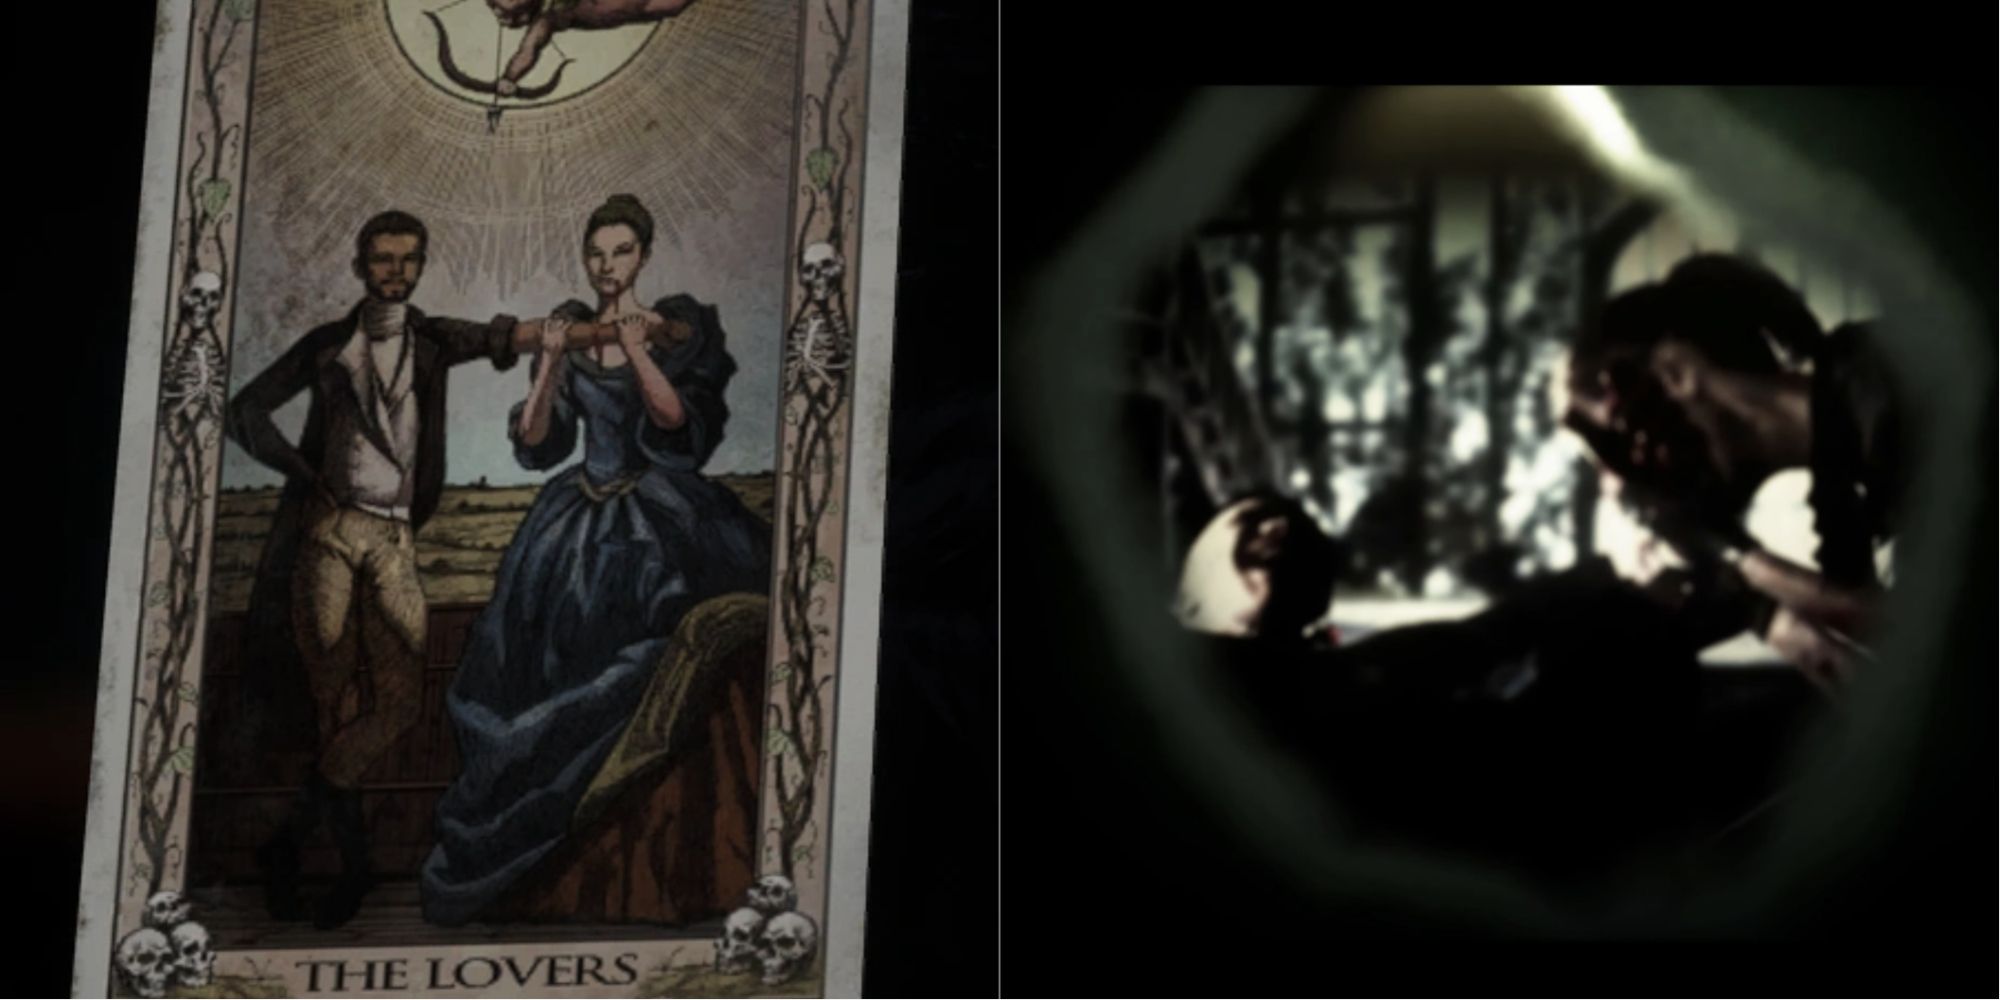 The Quarry's Major arcana rendition of the tarot card The Lovers On the right Laura bites Ryan's arm as he screams in pain